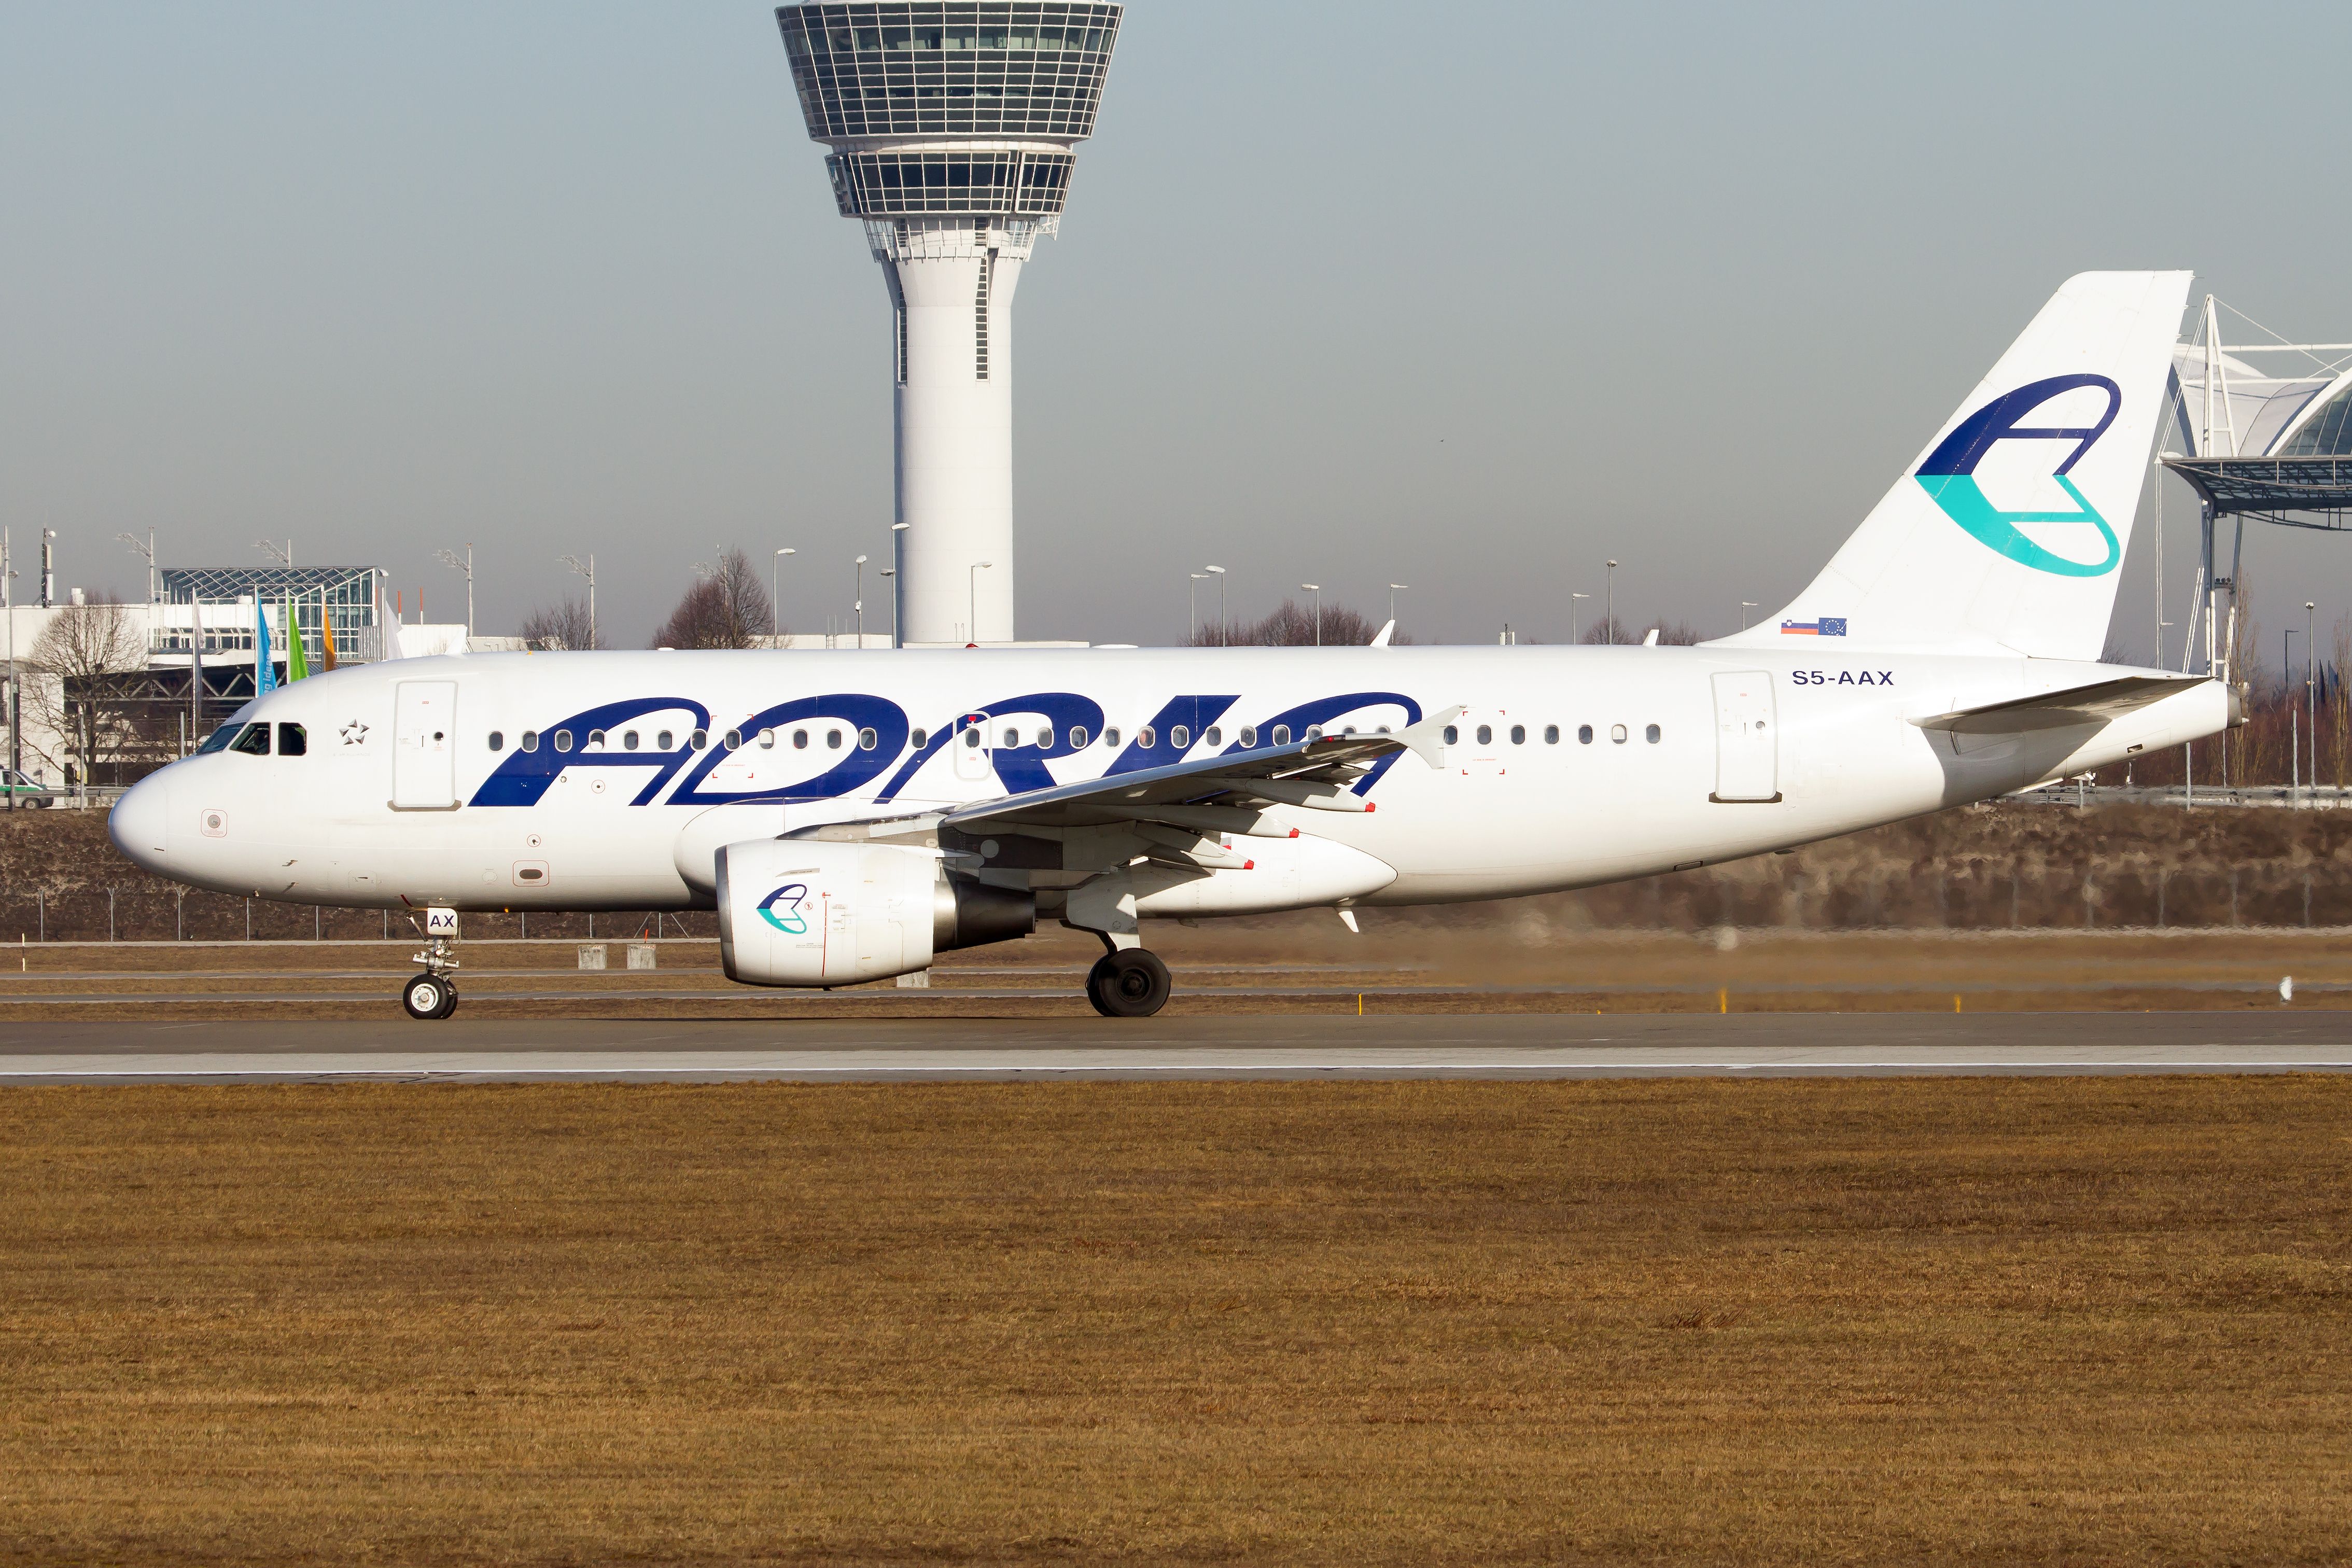 GettyImages-1172700229 Adria airways Airbus a319